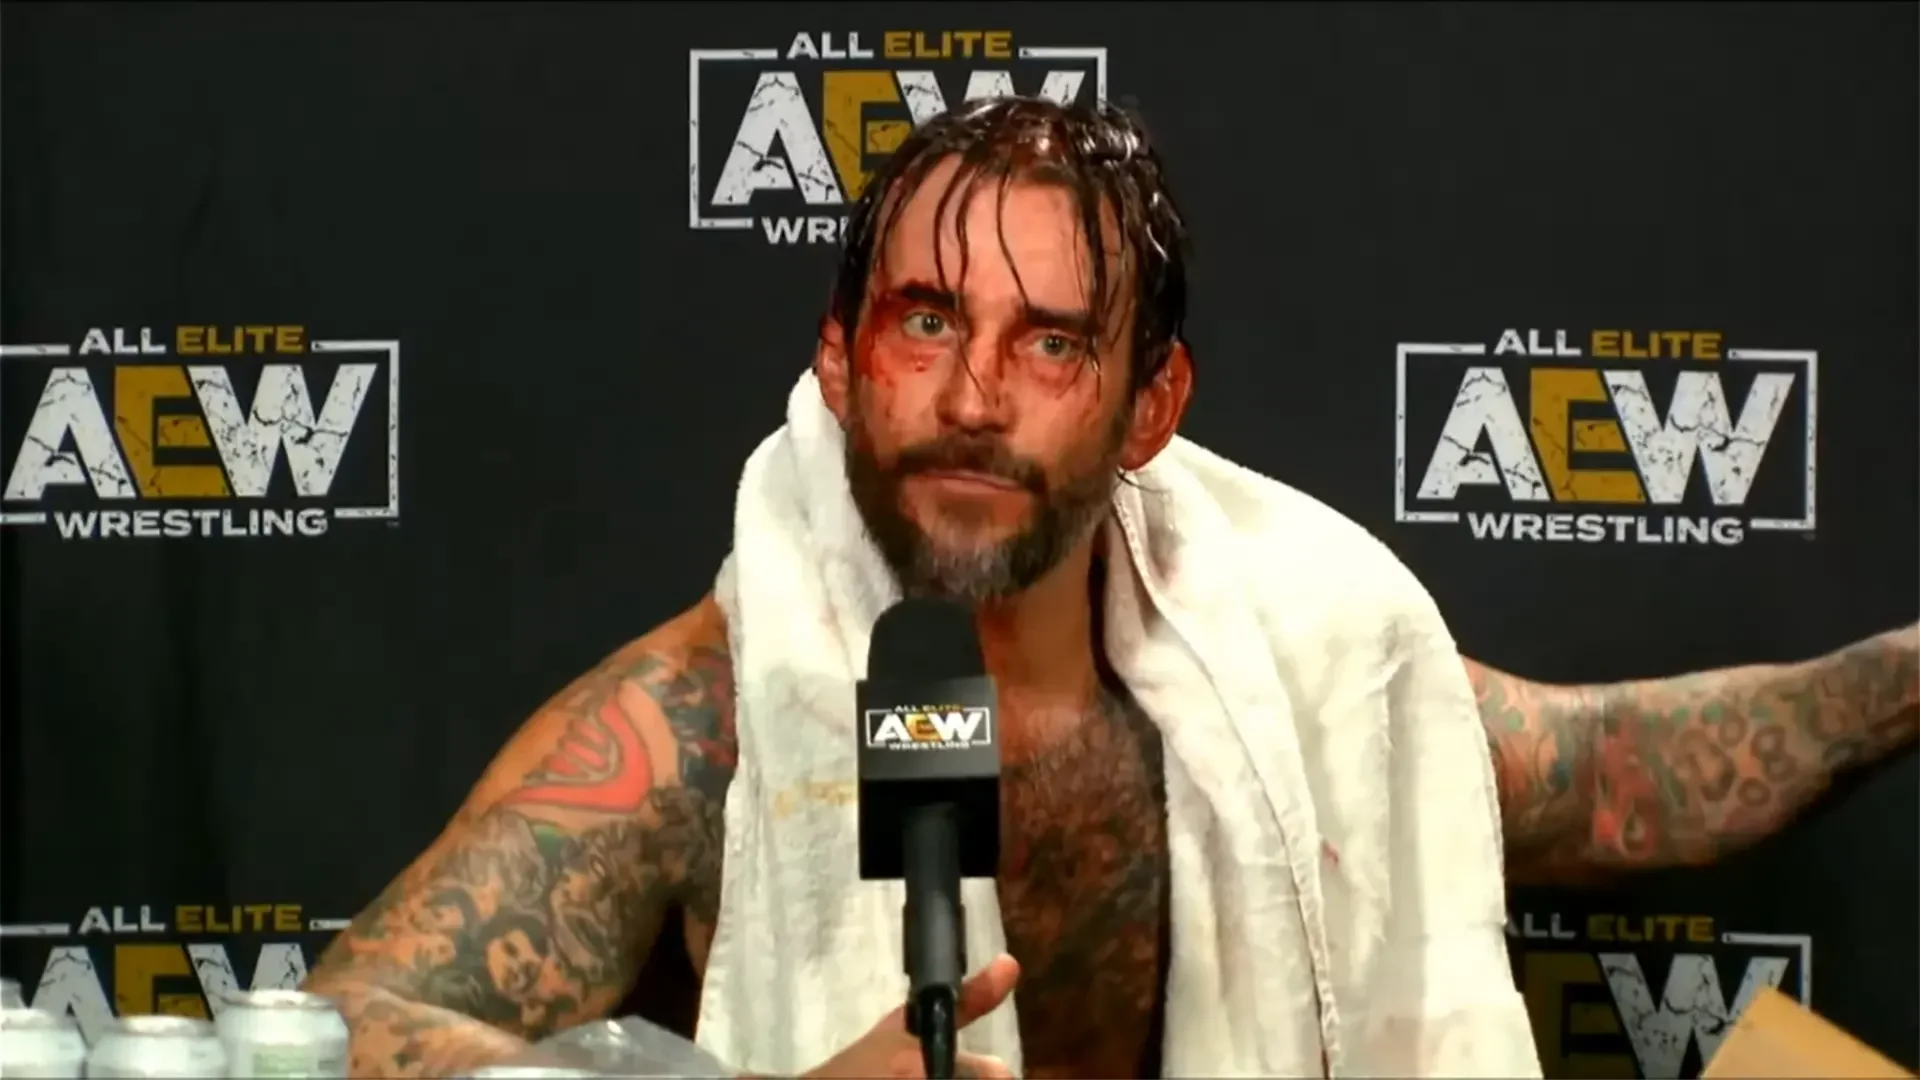 WATCH: CM Punk Addresses His Issues With Adam Page & Colt Cabana, Rips The Young Bucks